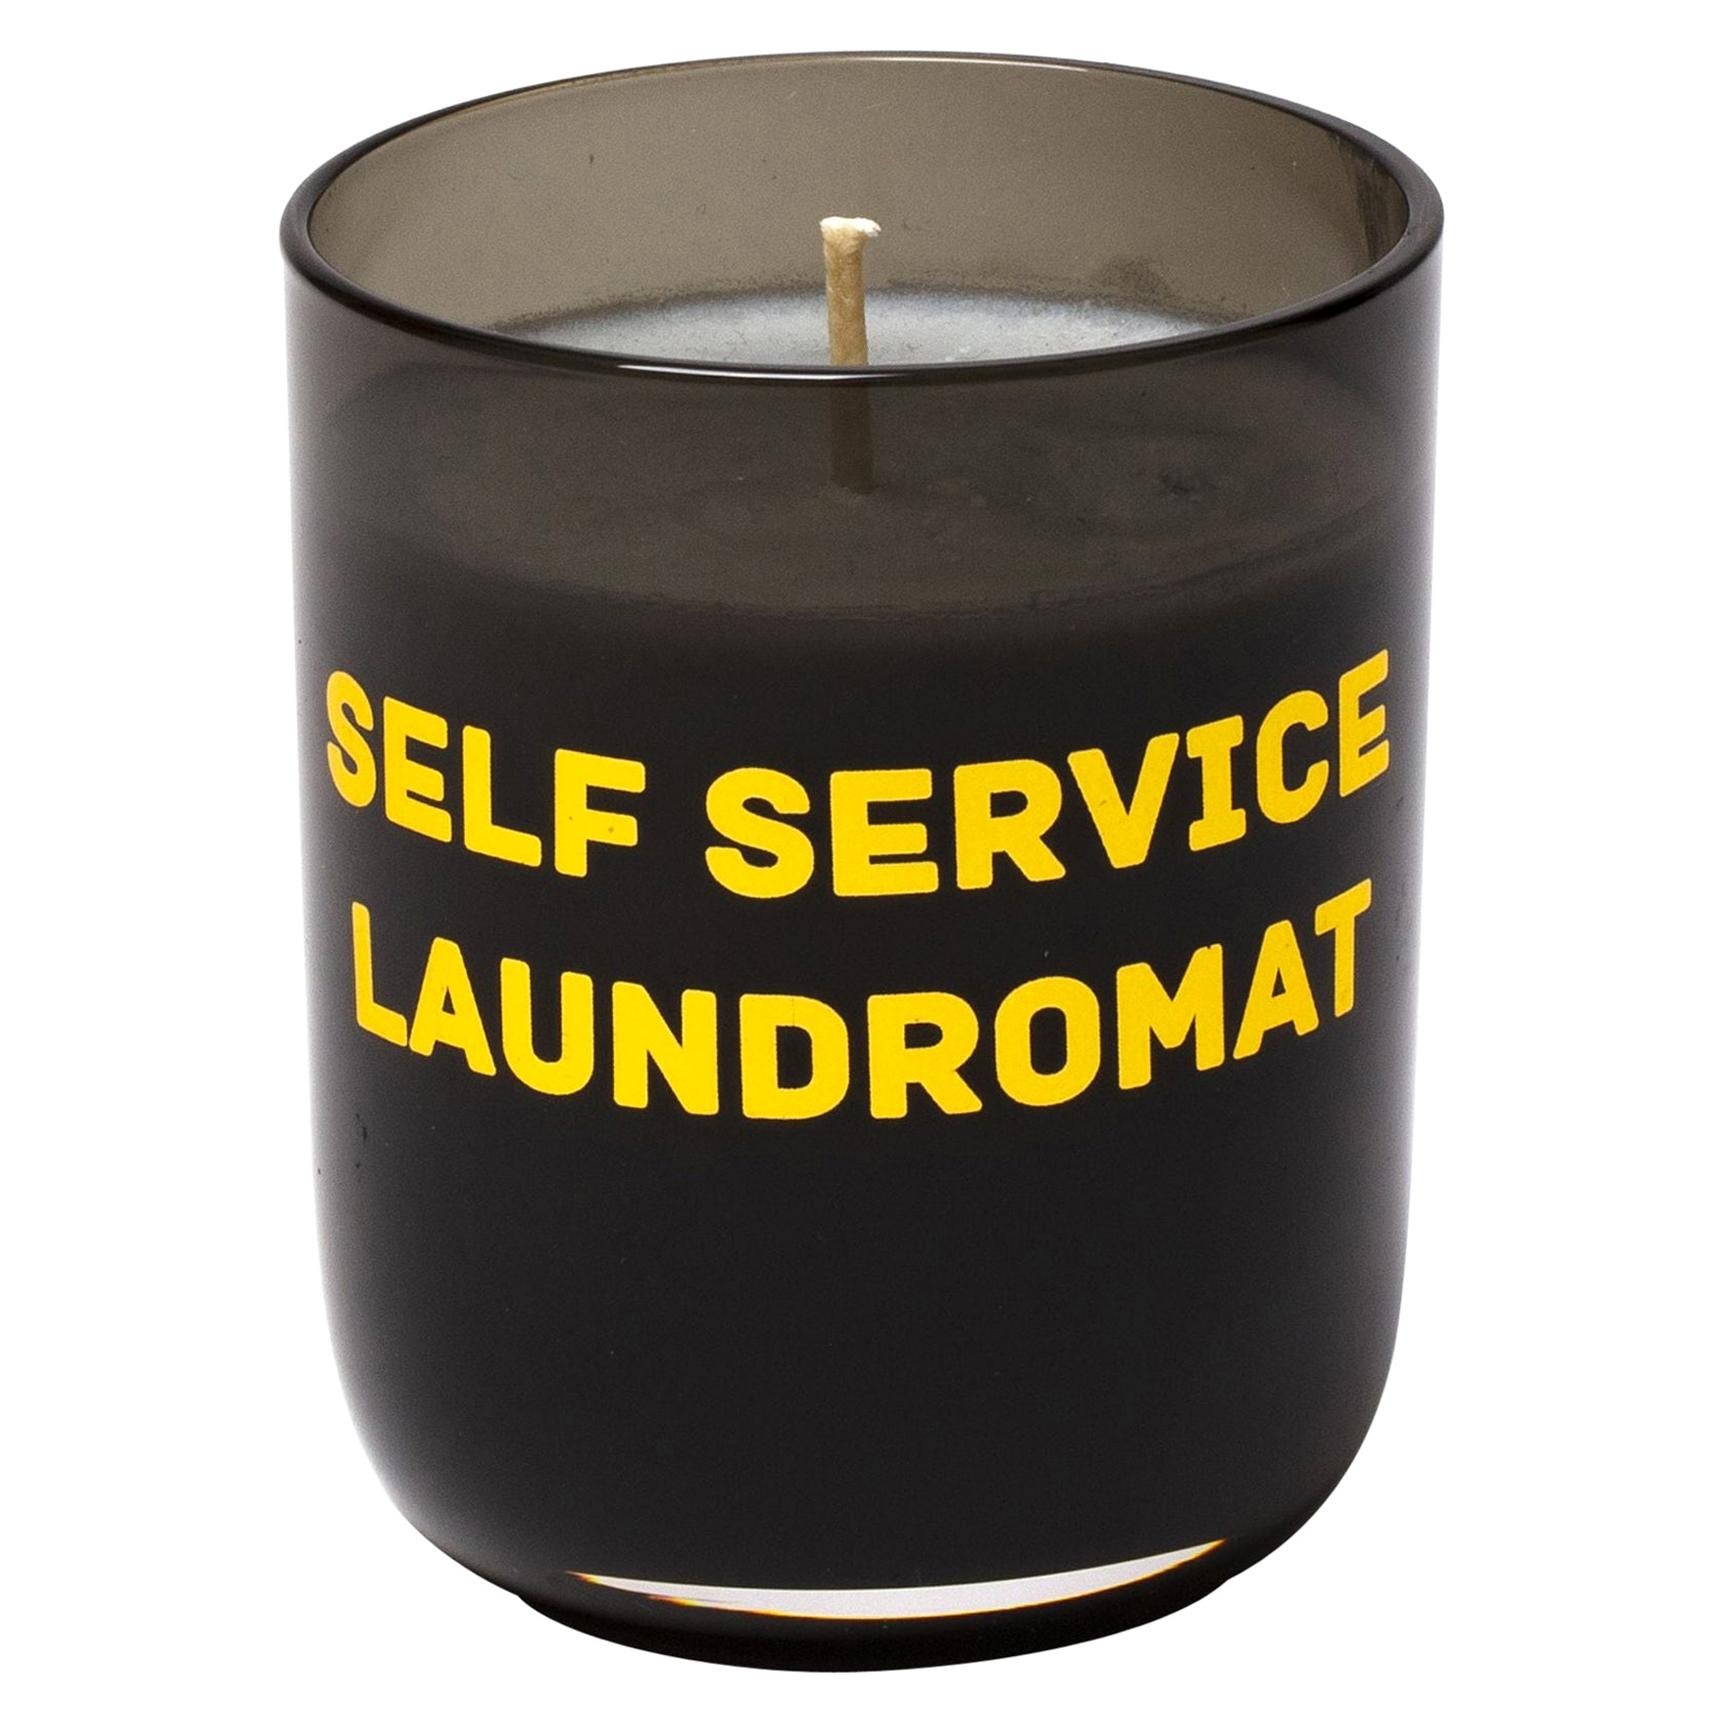 Diesel Self Service Laundromat candle NWOT